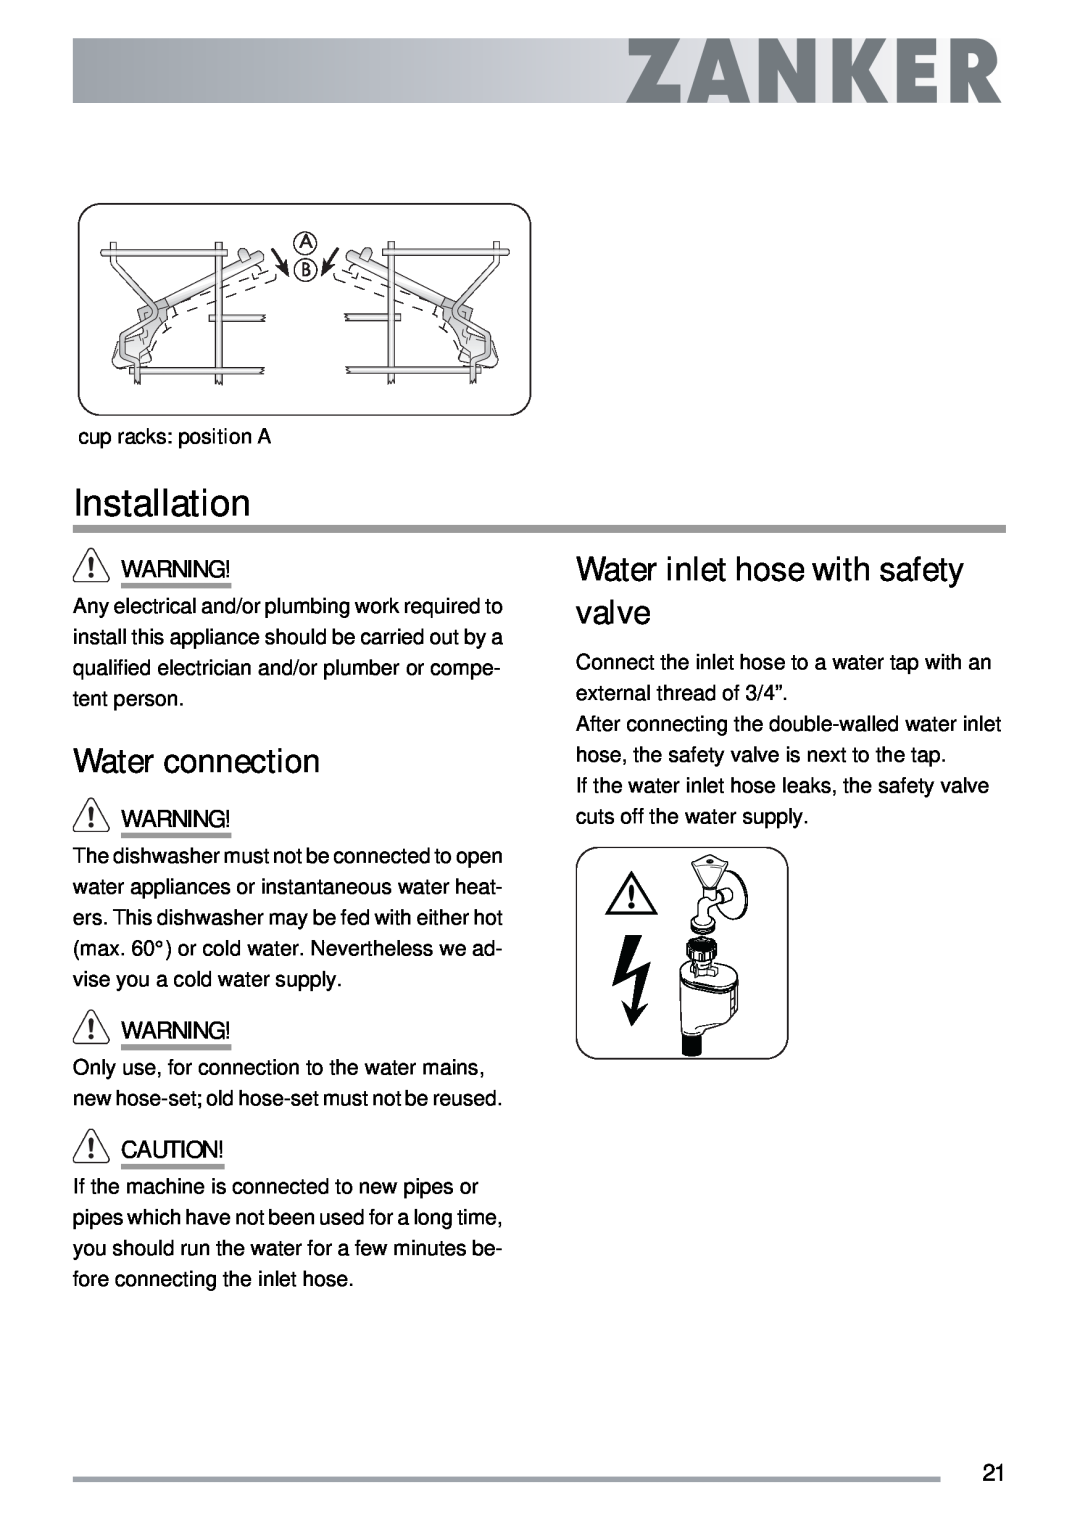 Electrolux ZKI1410 user manual Installation, Water connection, Water inlet hose with safety valve 